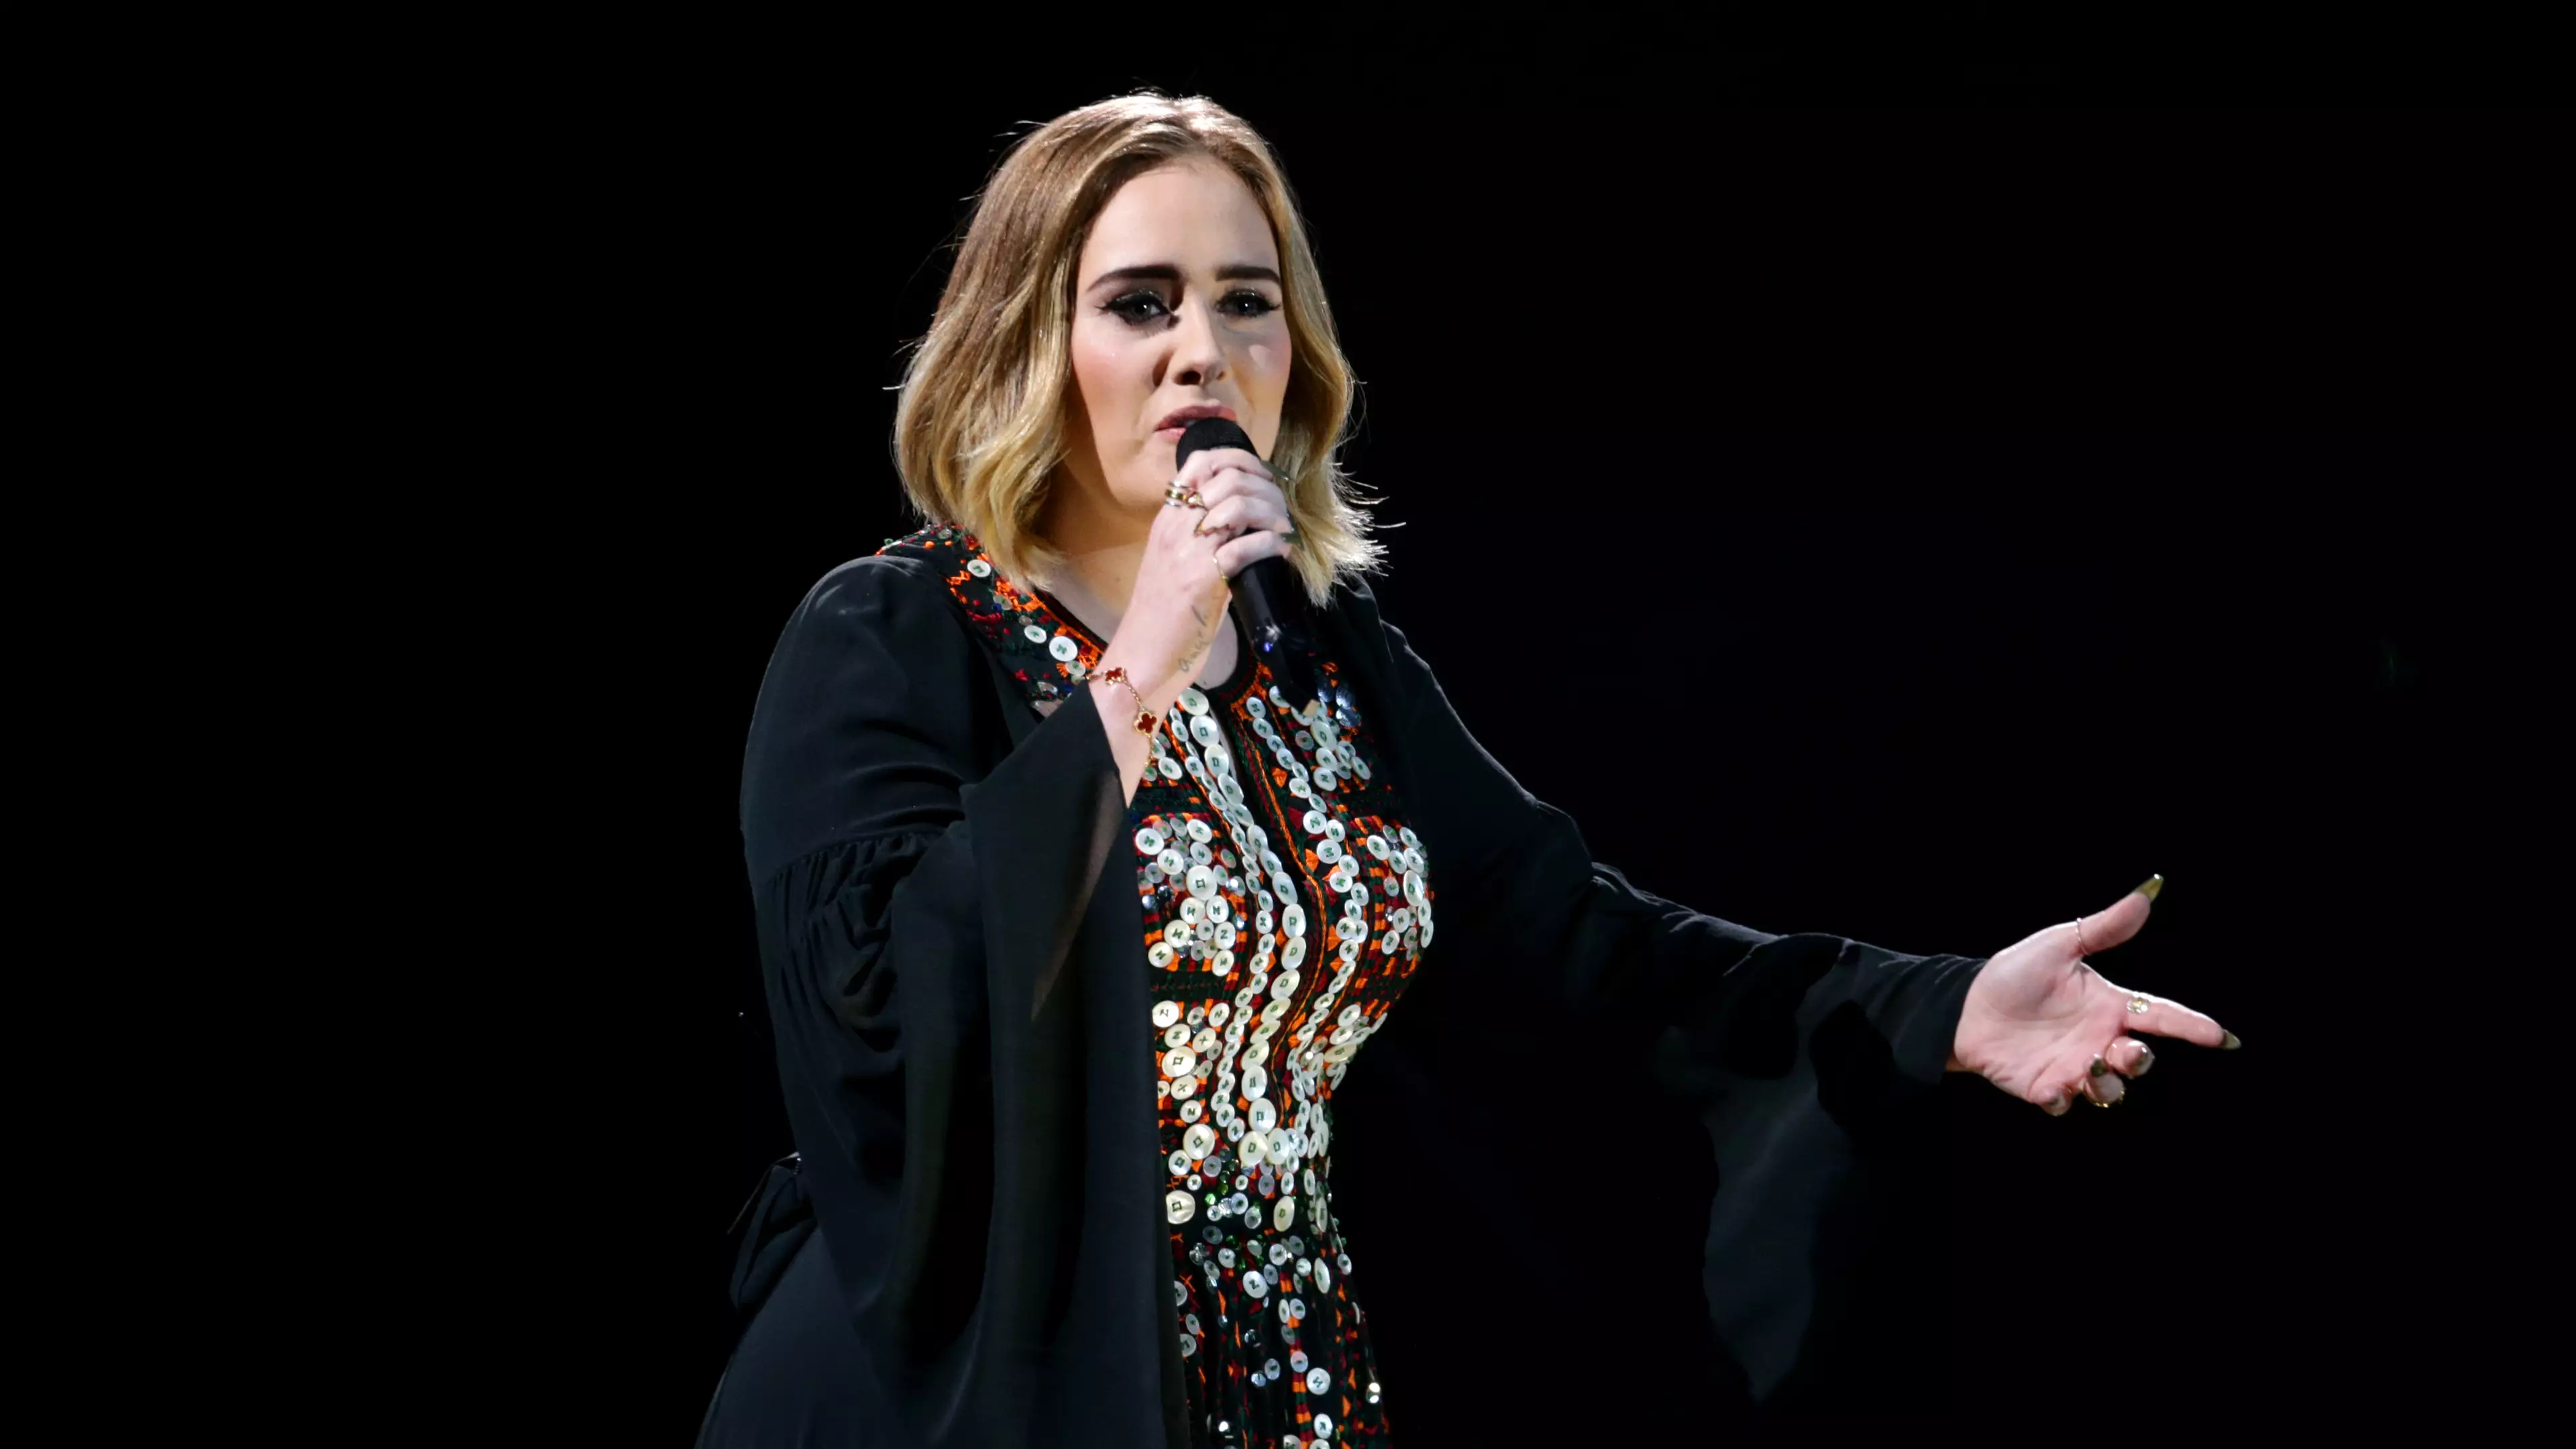 Adele Says She's Single Amid Speculation She's Dating Skepta